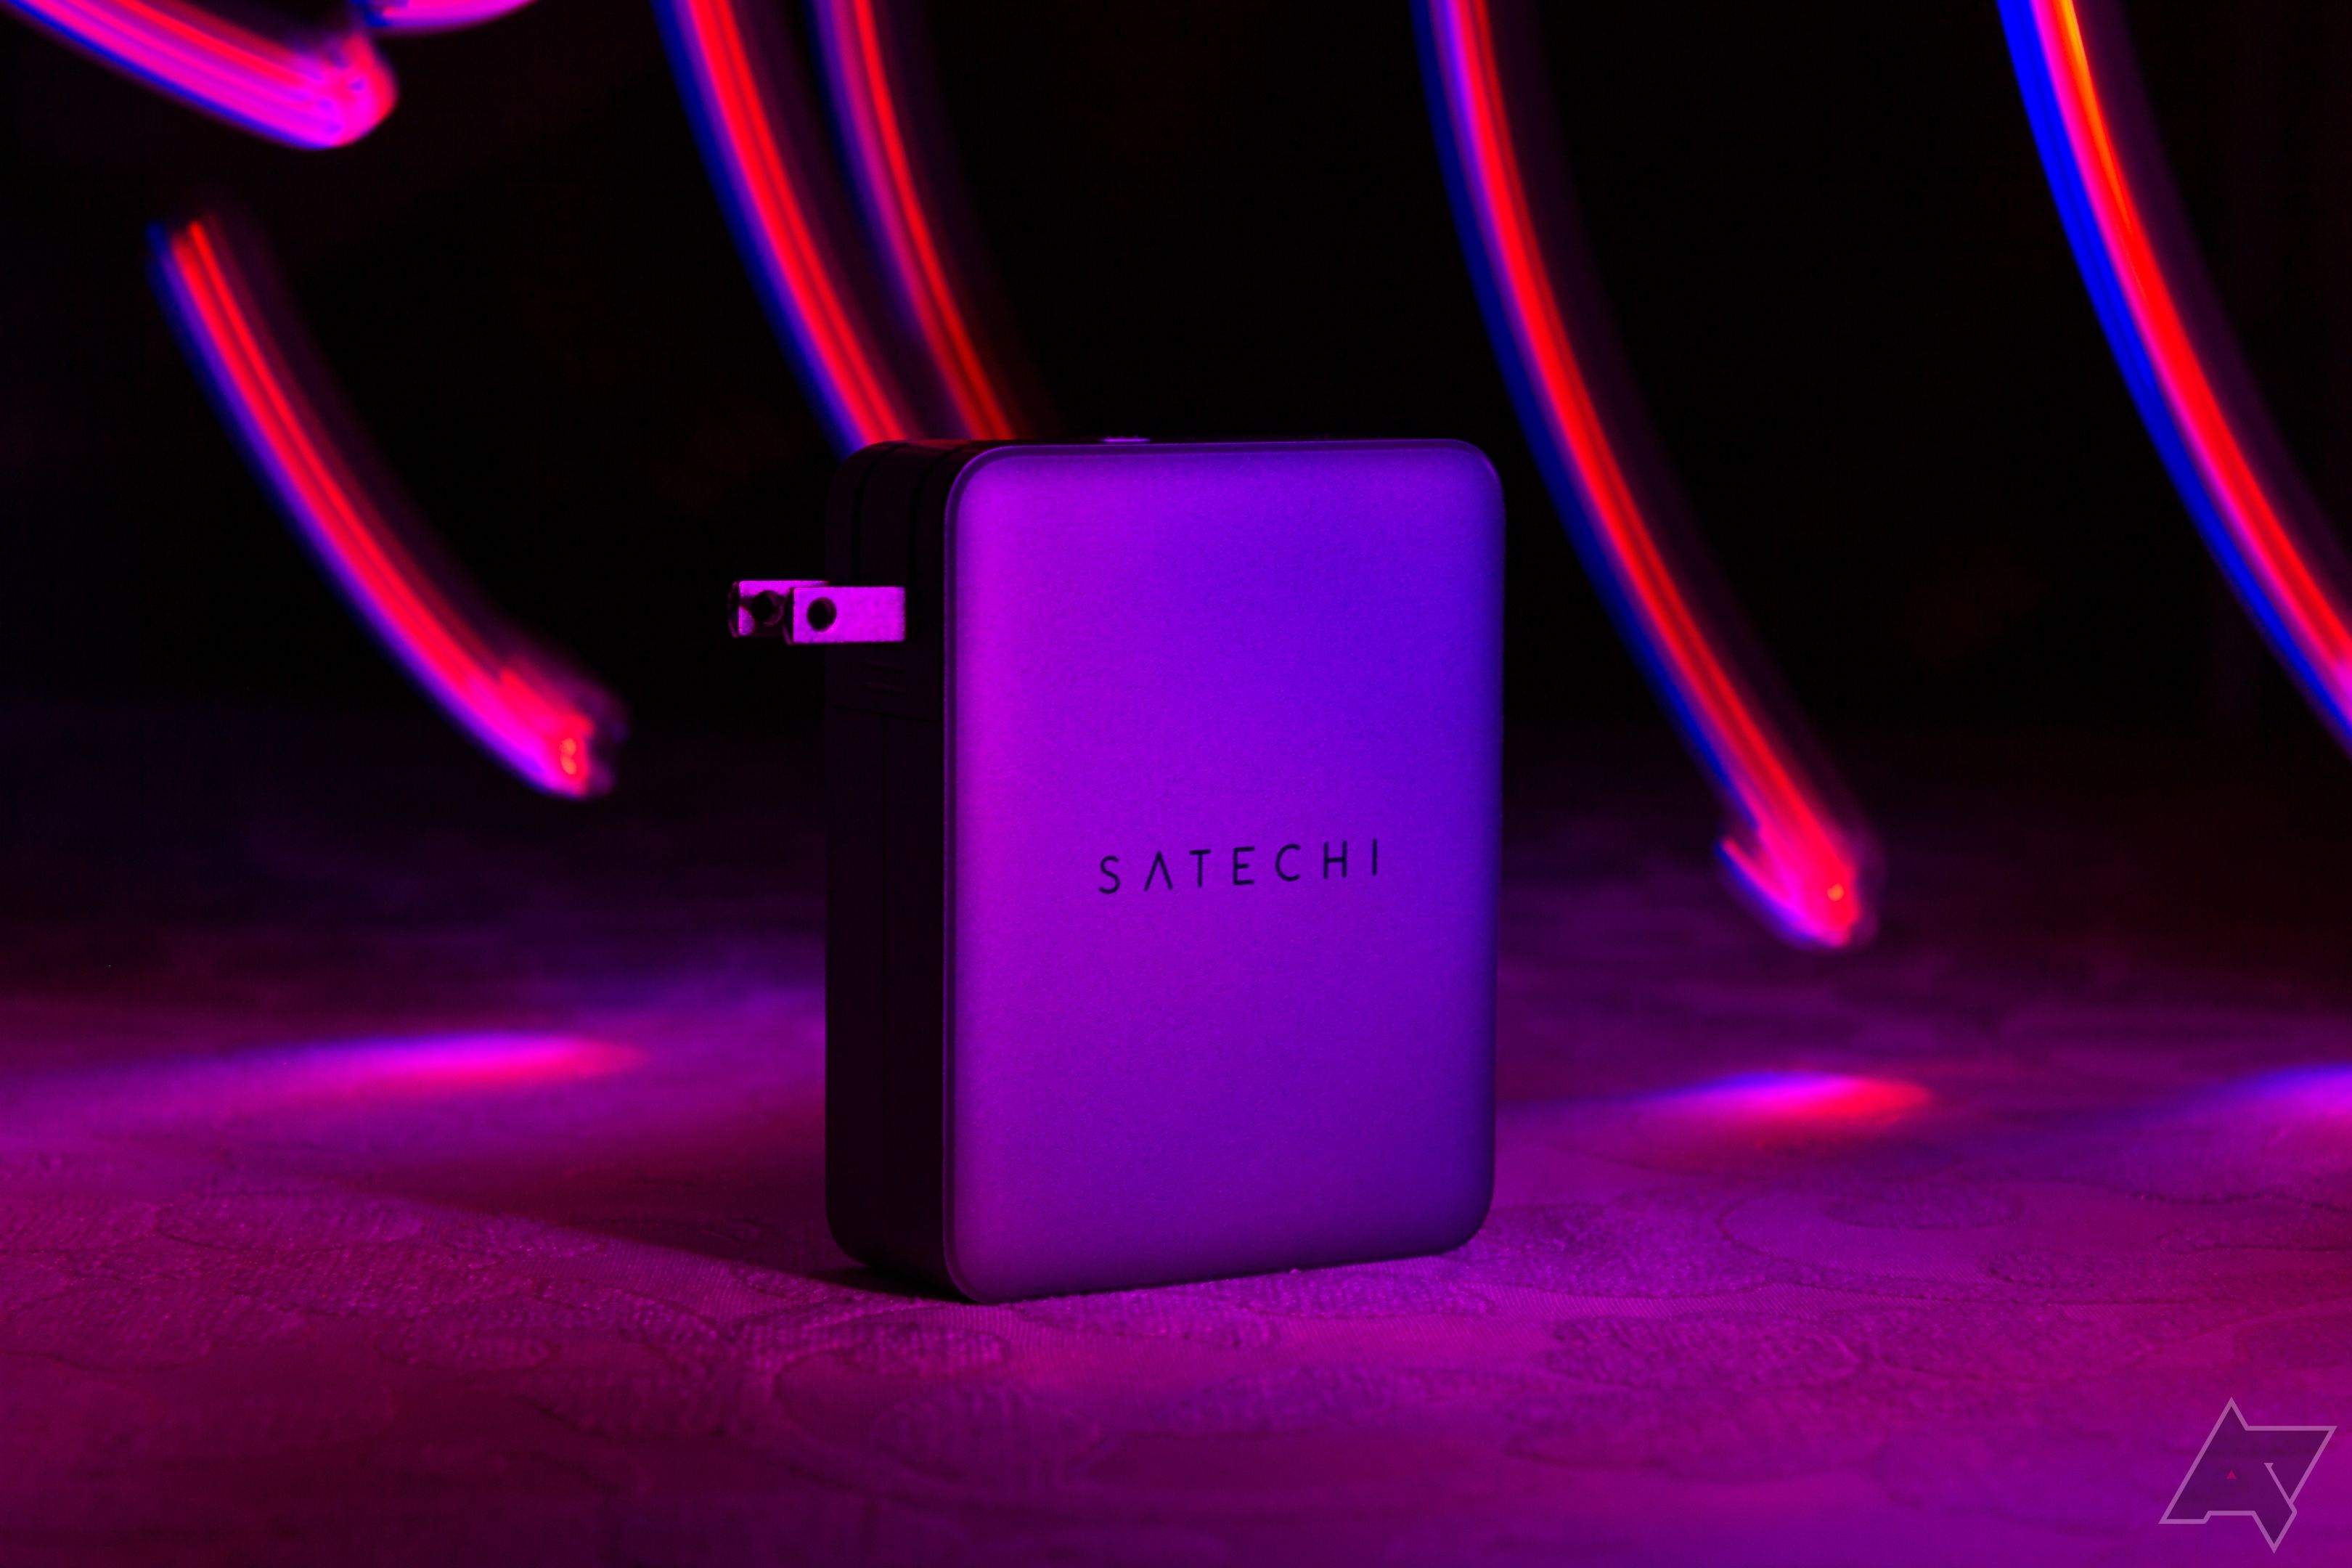 Satechi-145-travelcharger-review-06-1